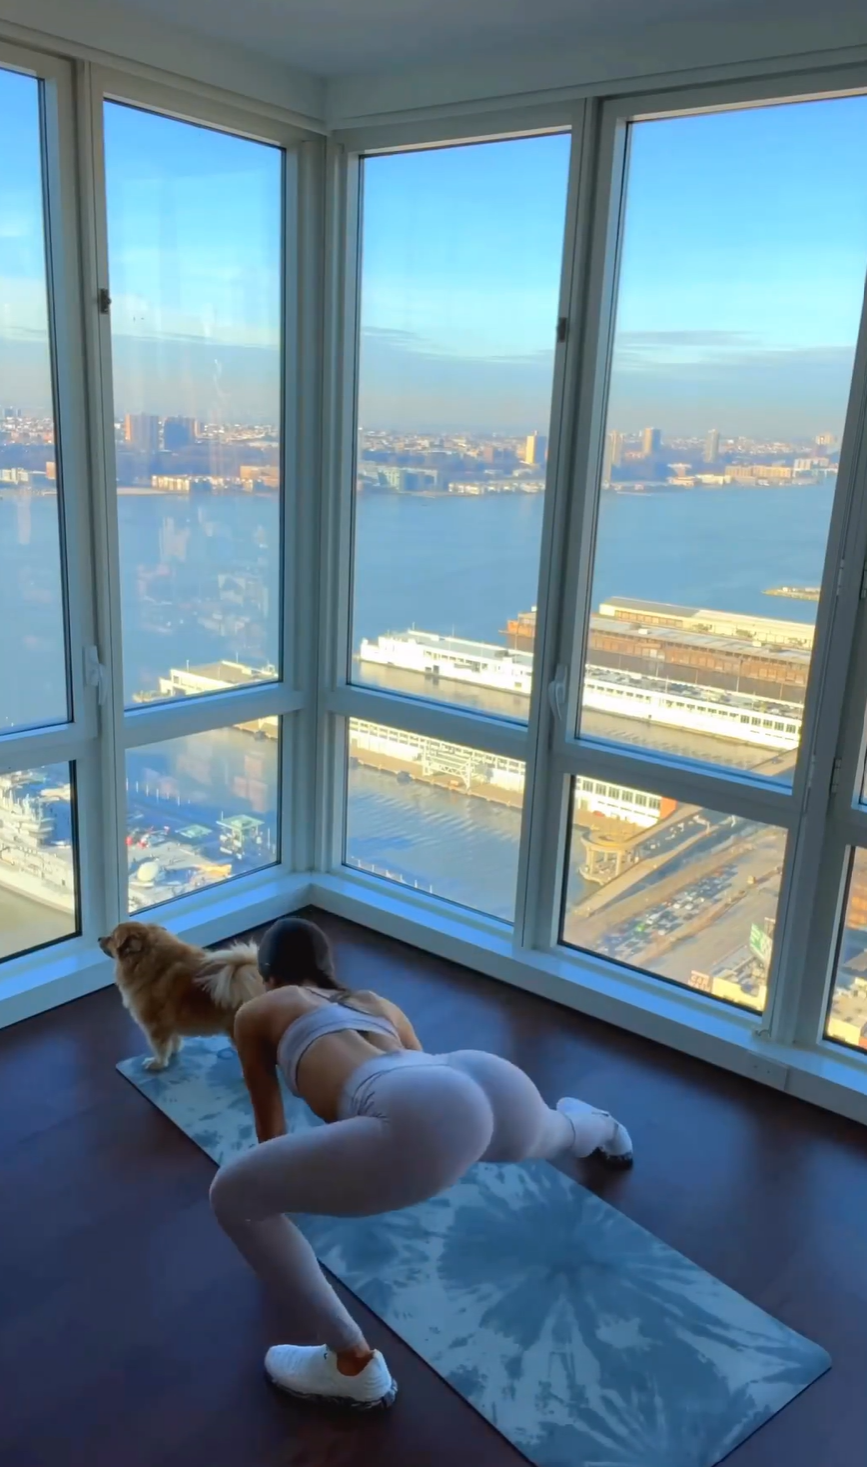 Jen Selter shares her morning routine with her followers